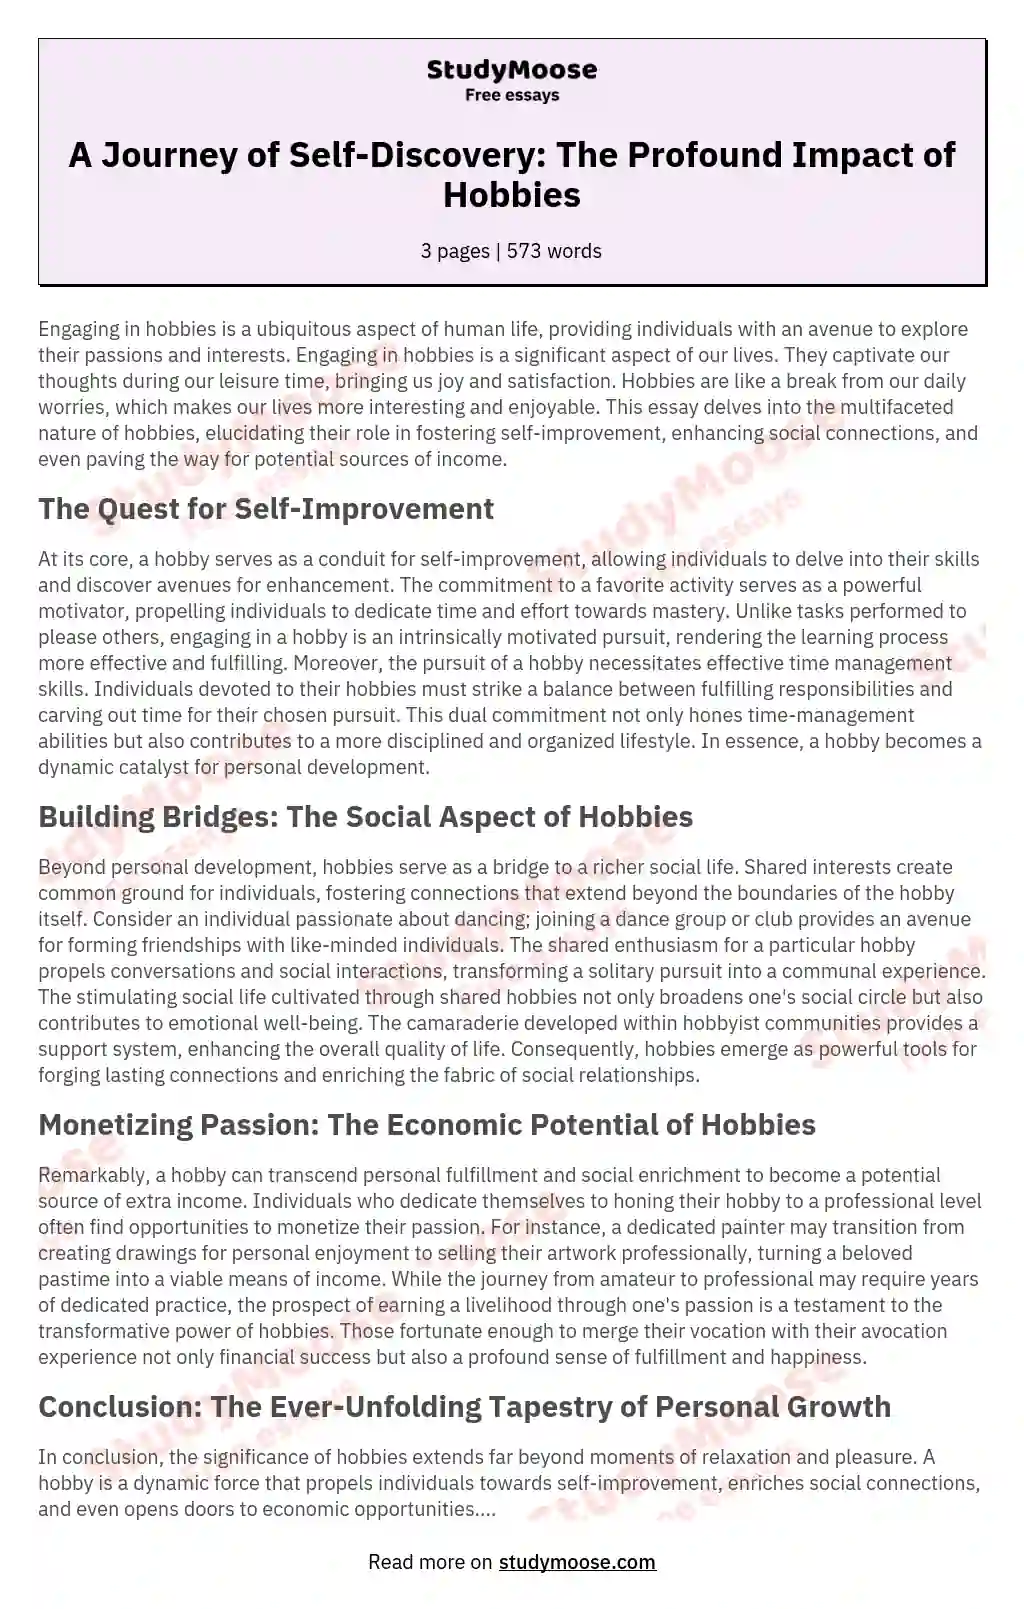 A Journey of Self-Discovery: The Profound Impact of Hobbies essay